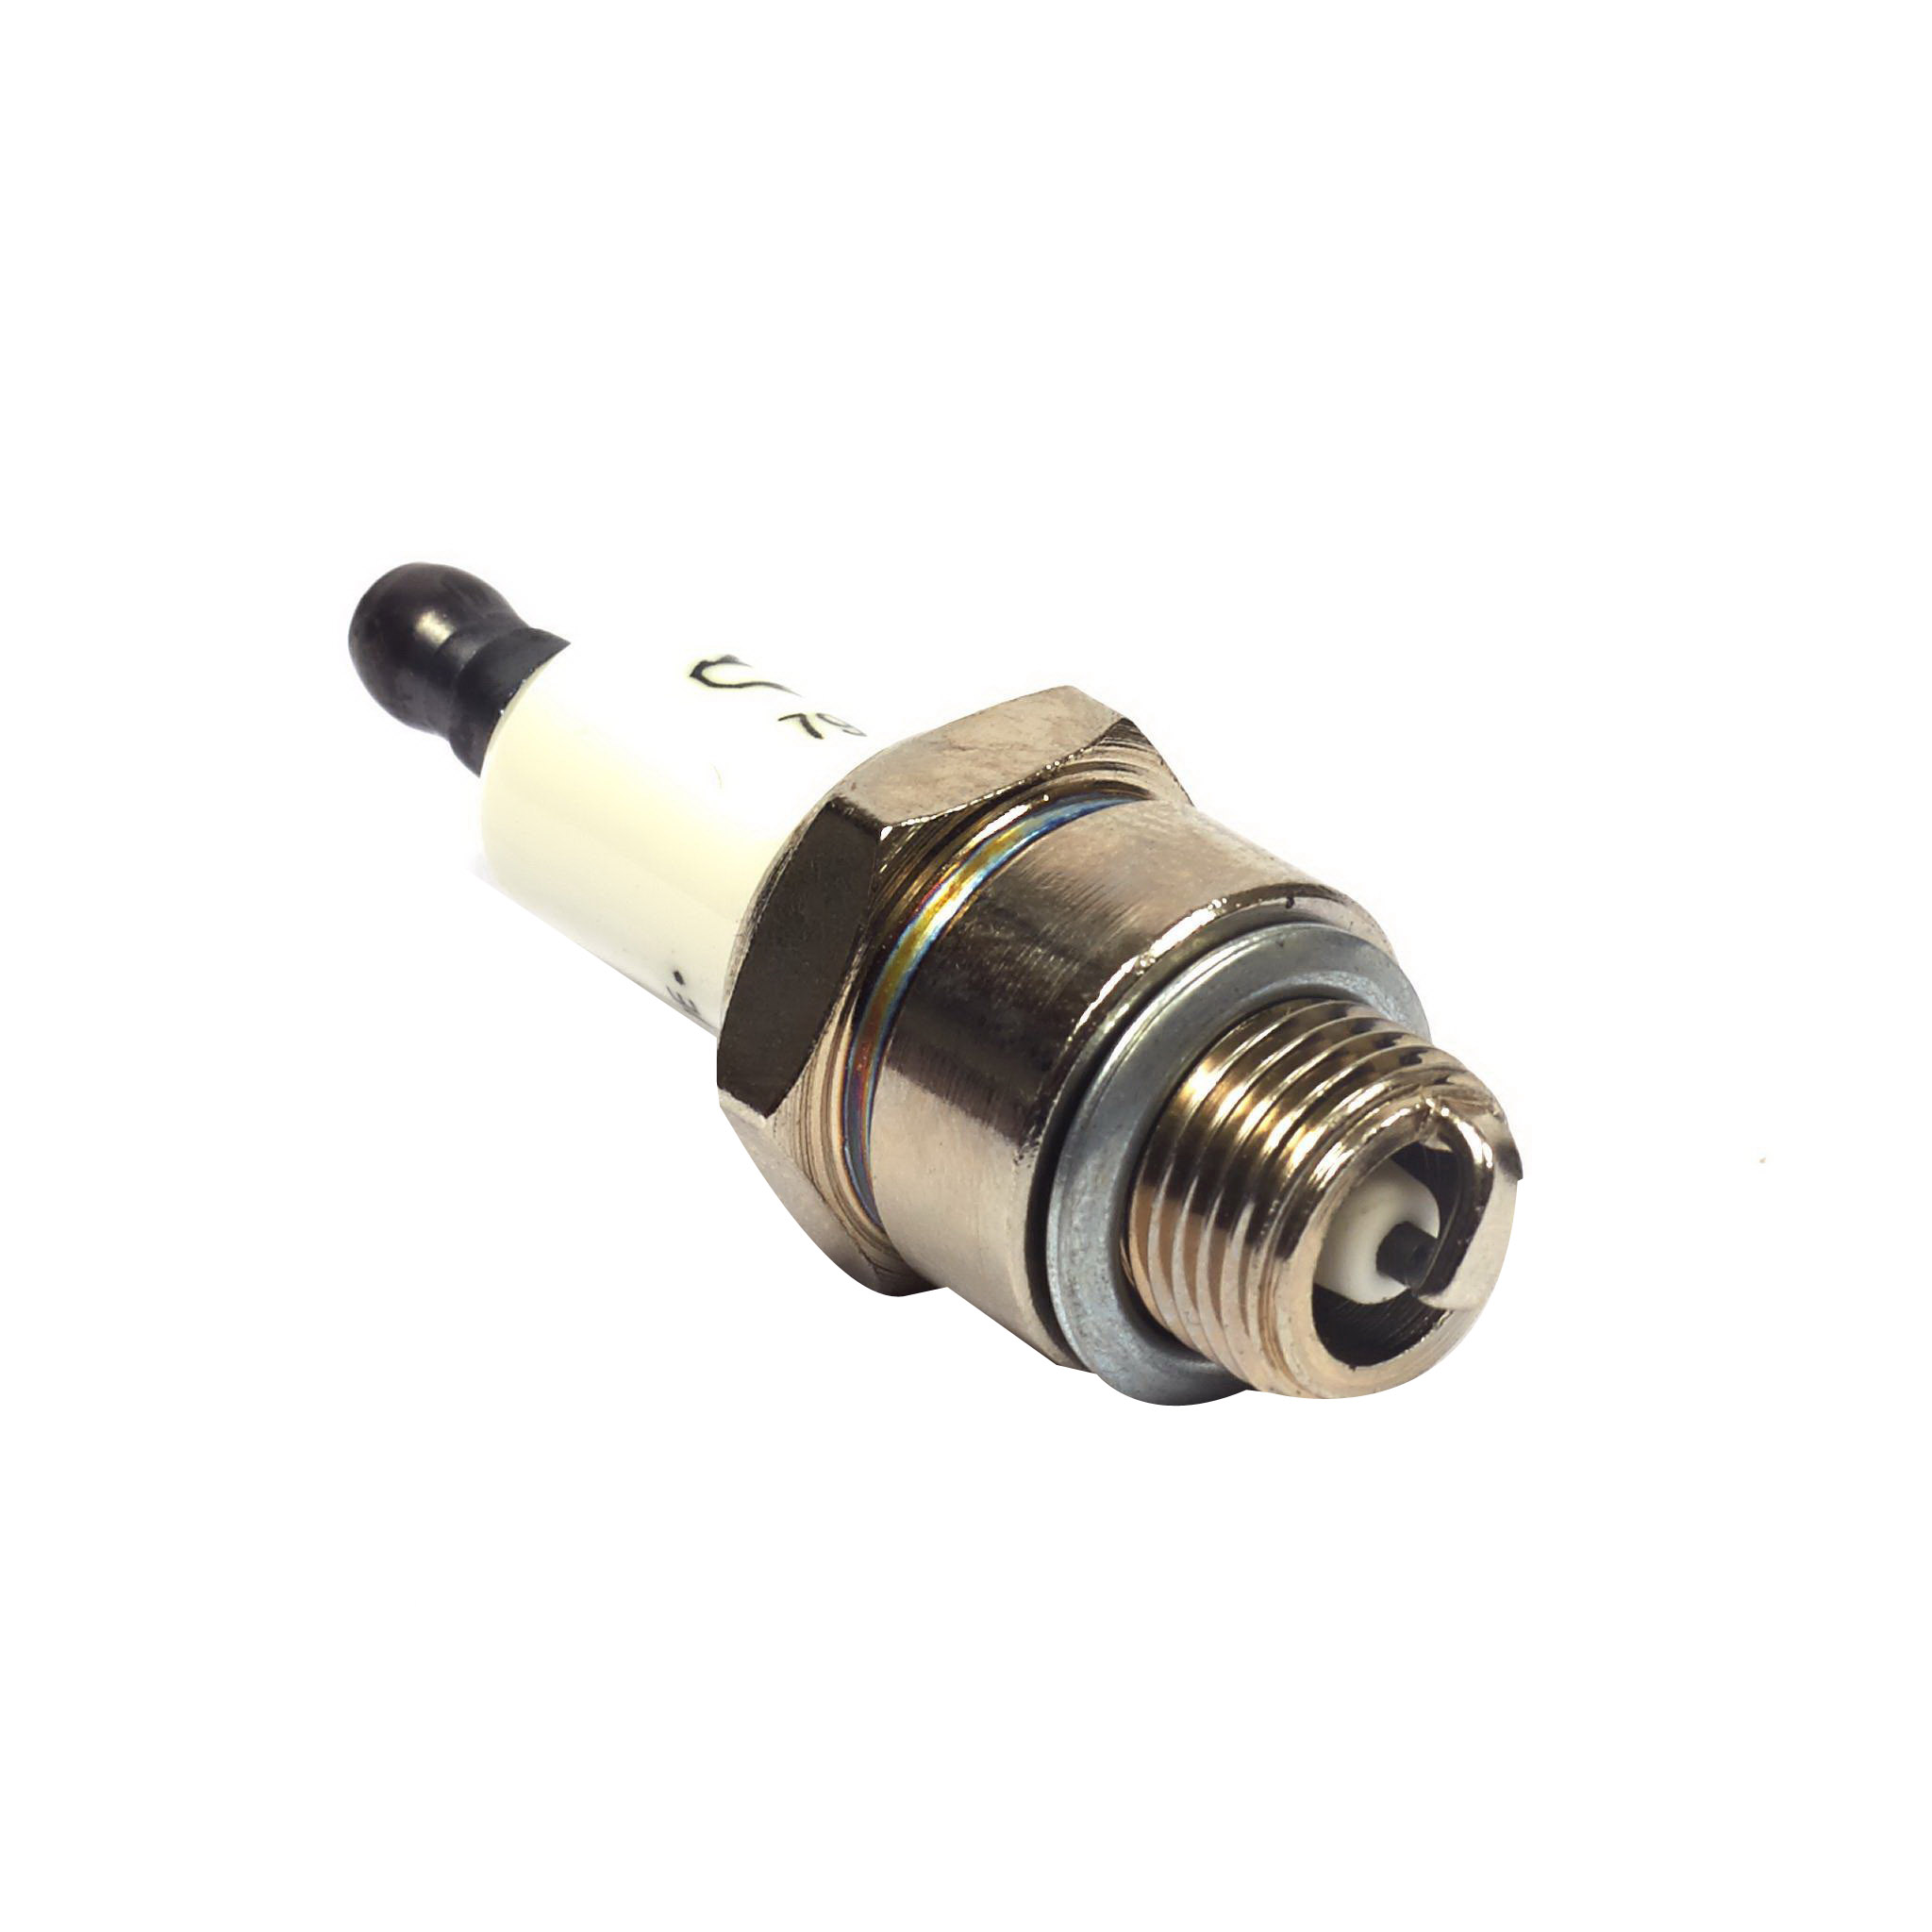 5095K Spark Plug, For: 475, 500, 600, 625, 650 and 675 Series L-Head Engine